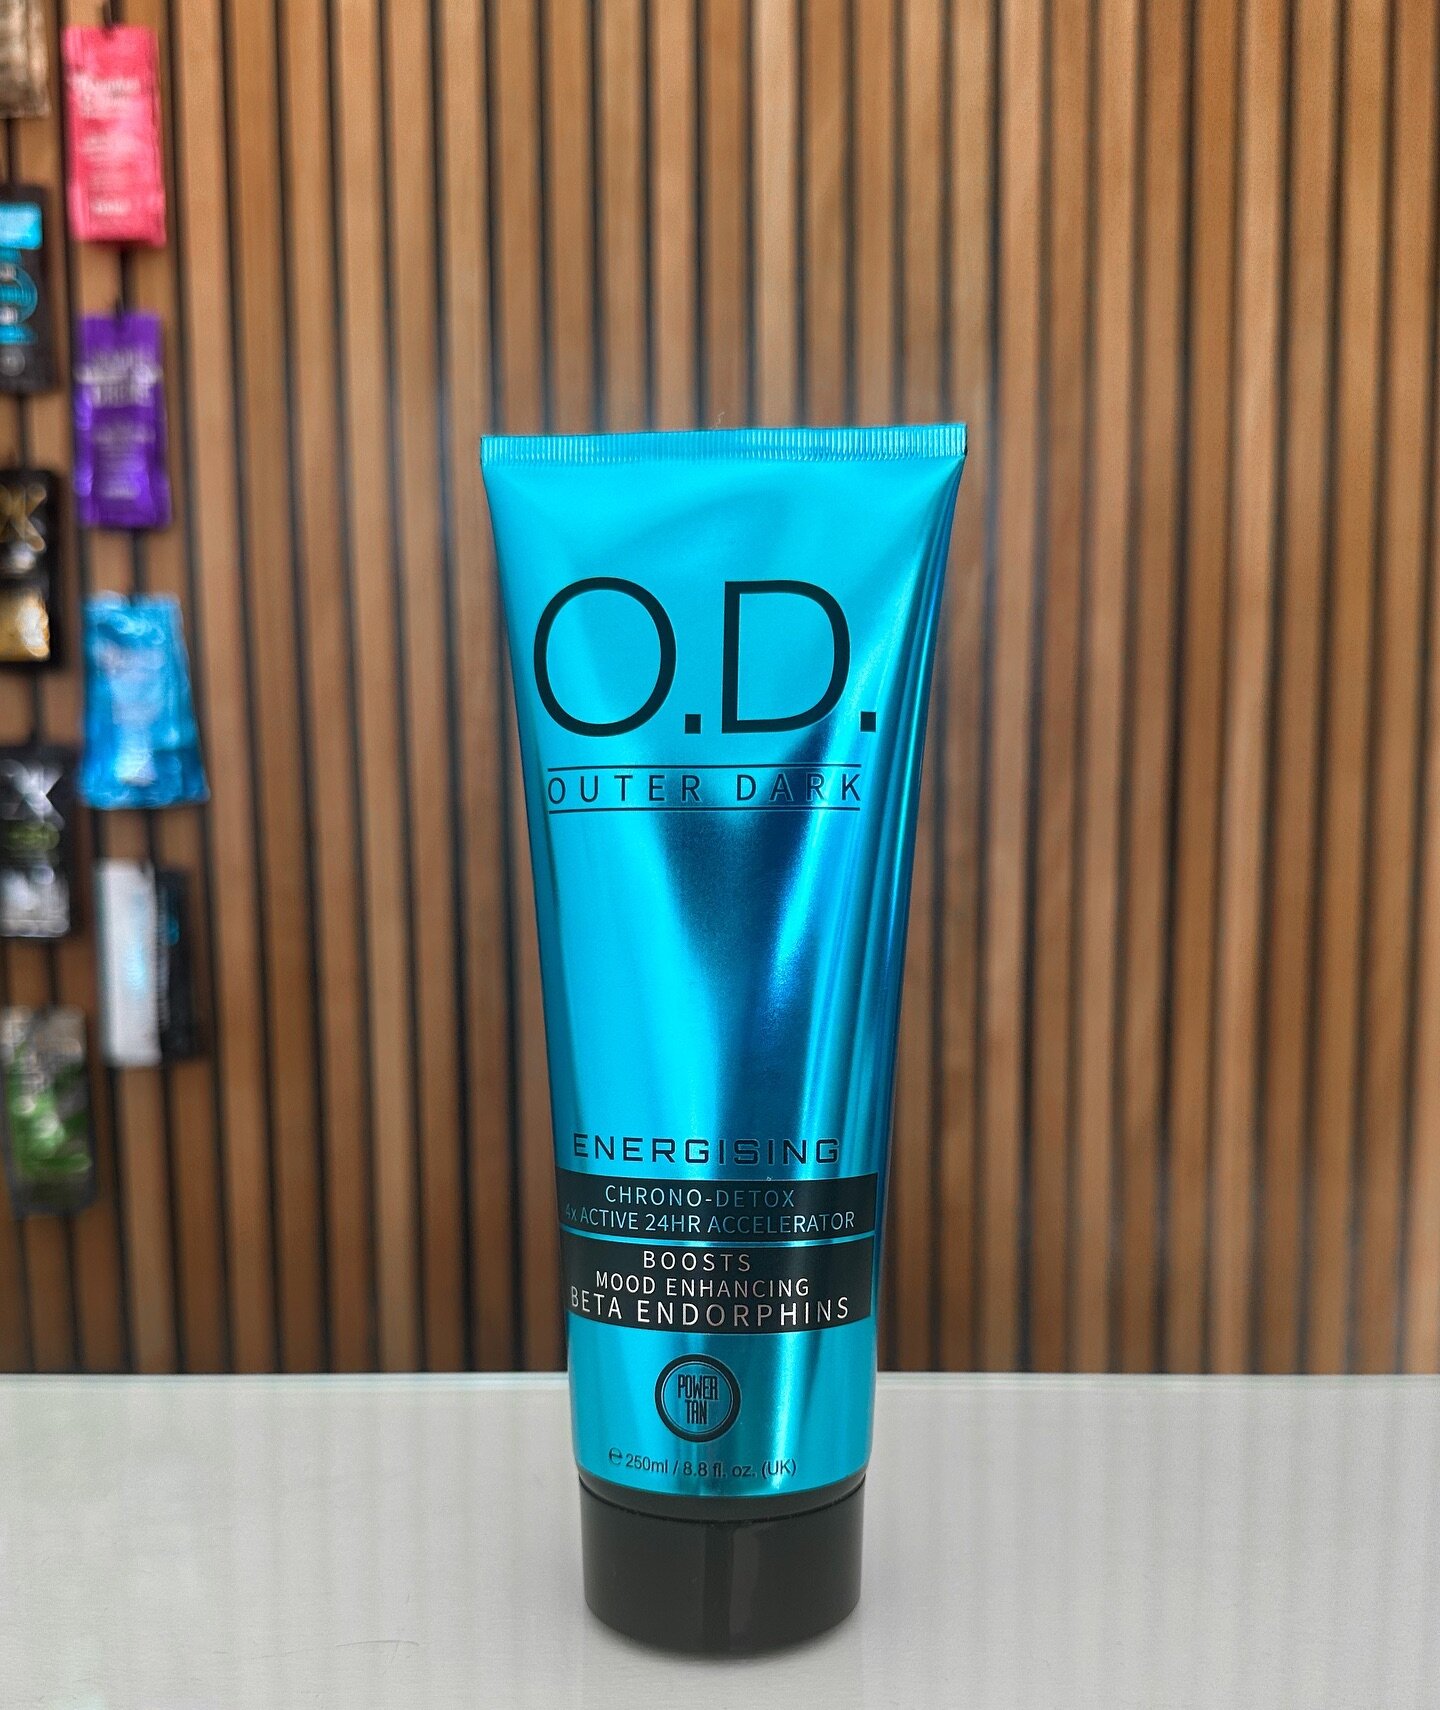 NEW CREAM - OUTER DARK 🩵🖤
Power Tans brand new cream, is the latest innovation to tanning! 

A 24hour 4x Active tanning complex, that will deliver long lasting &amp; dark tanning results. 
Whilst at the same time, actively improving your mood, by b